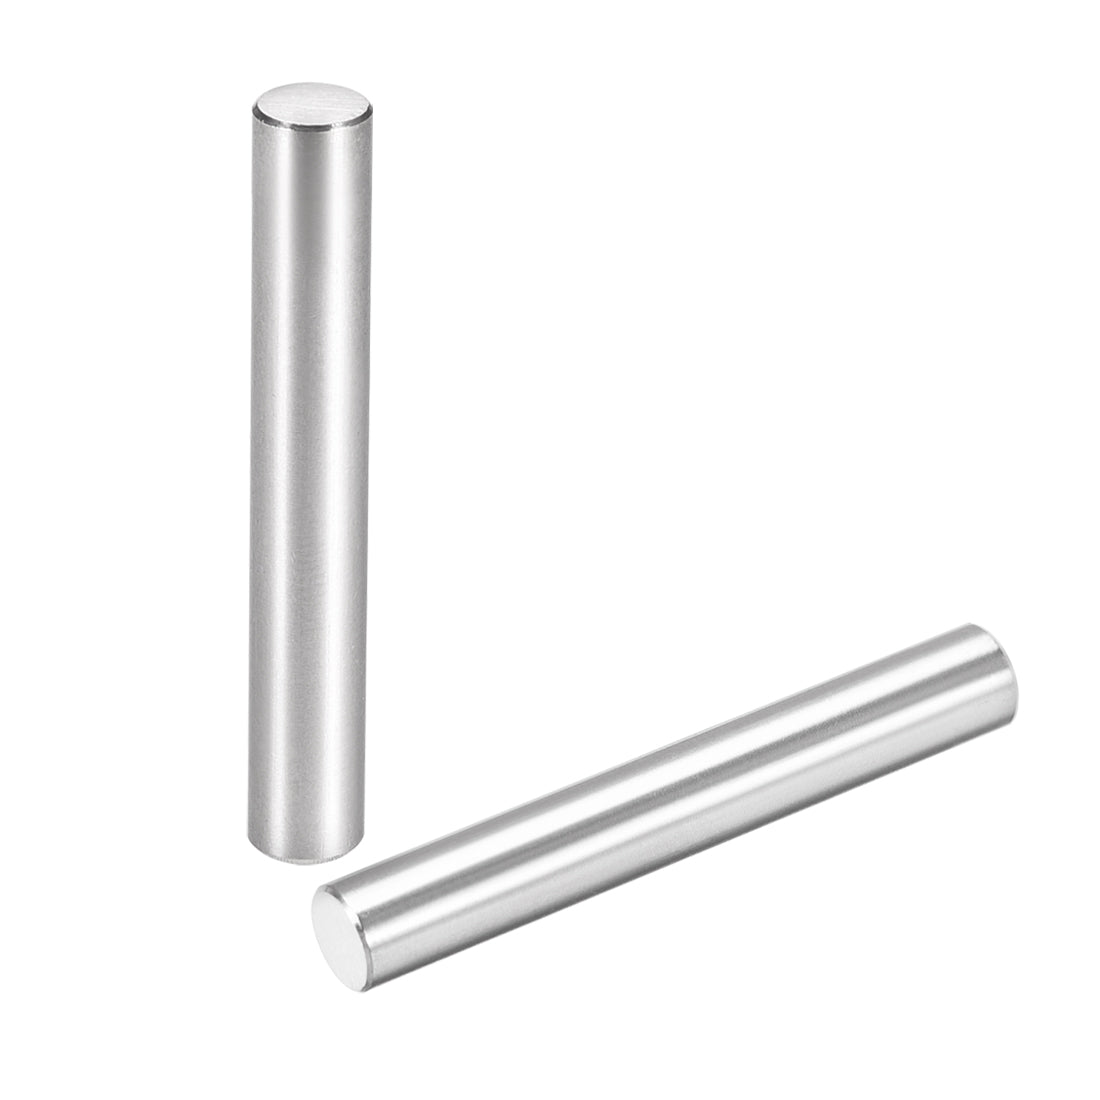 uxcell Uxcell 15Pcs Dowel Pin 304 Stainless Steel Cylindrical Shelf Support Pin